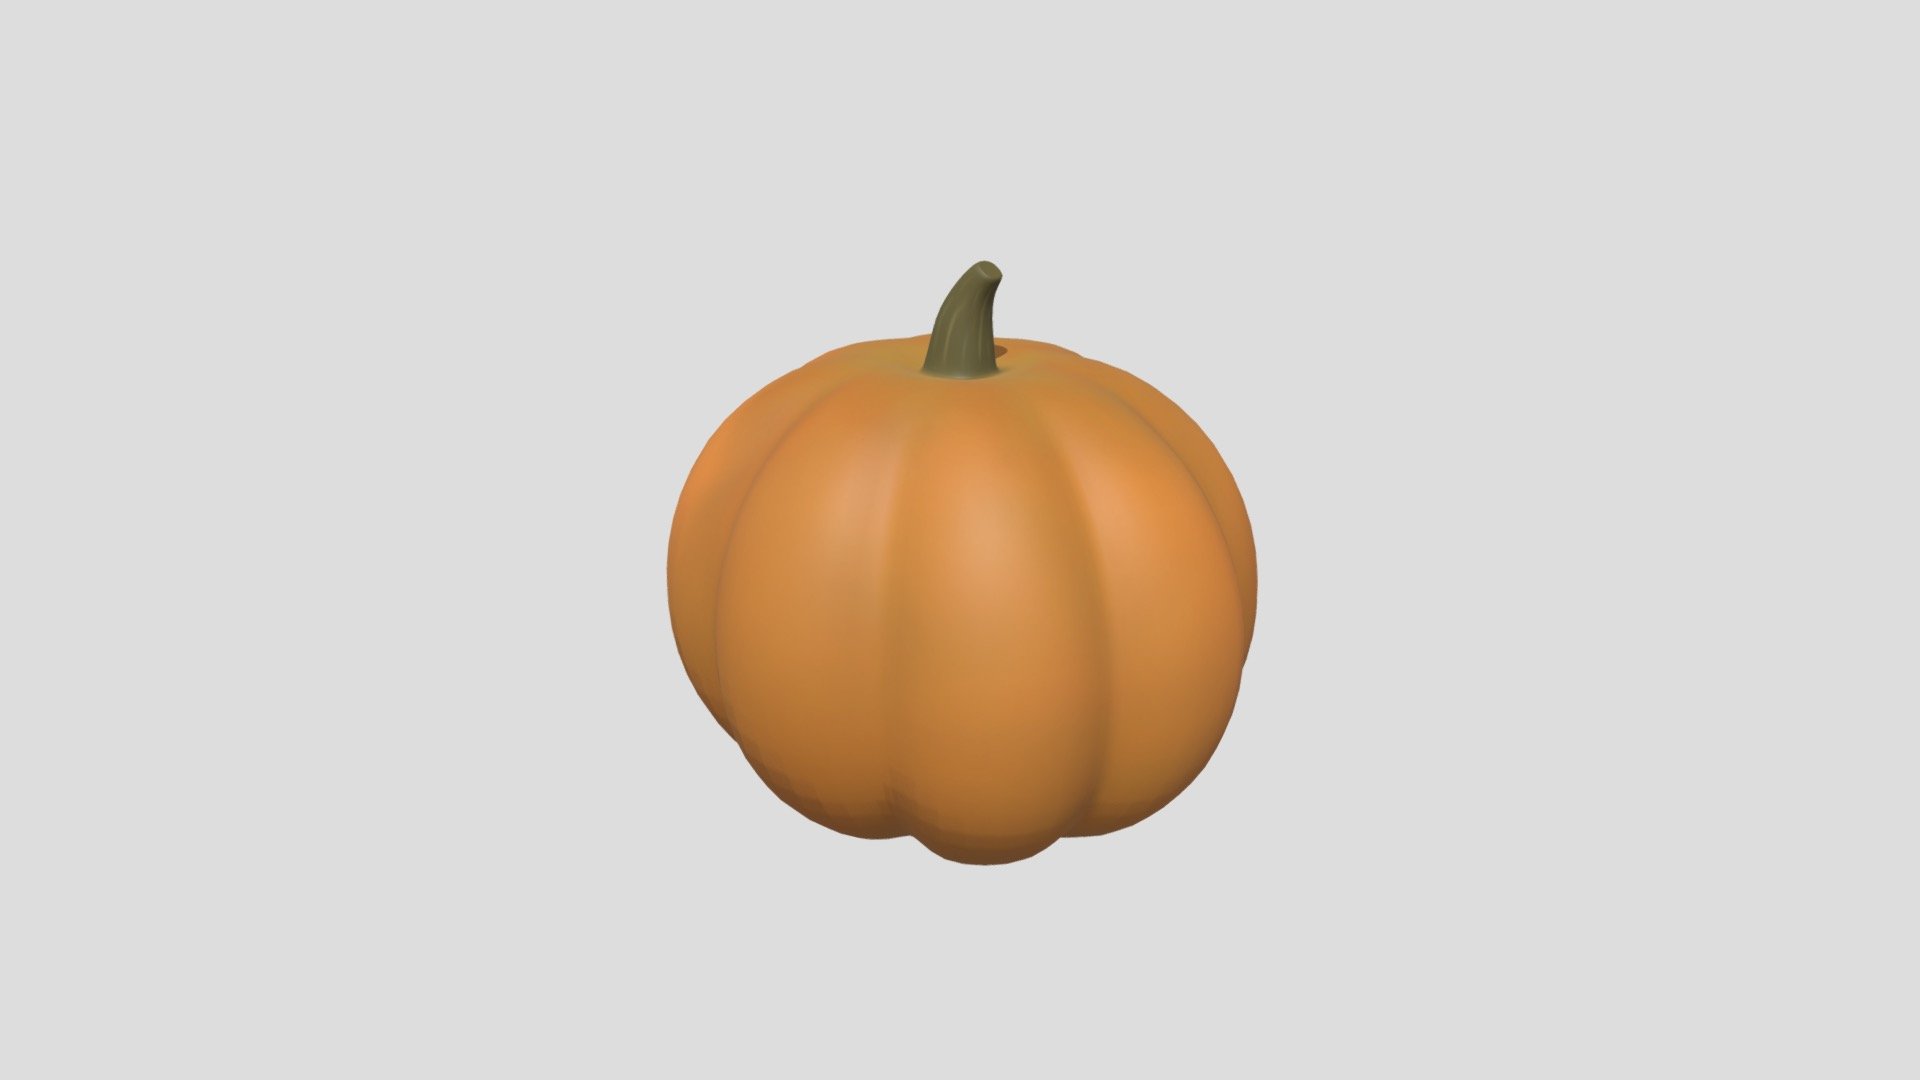 Subdivision Level: 1

Non-Mirrored.

Textures: 1024 x 1024, Multiple orange and brown colors on texture.

Materials: 2 - Pumpkin, Stem.

Formats: .stl .obj .fbx .dae .x3d

Origin located on bottom-cente

Polygons: 10688

Vertices: 5346

I hope you enjoy the model! - Pumpkin - Buy Royalty Free 3D model by Ed+ (@EDplus) 3d model